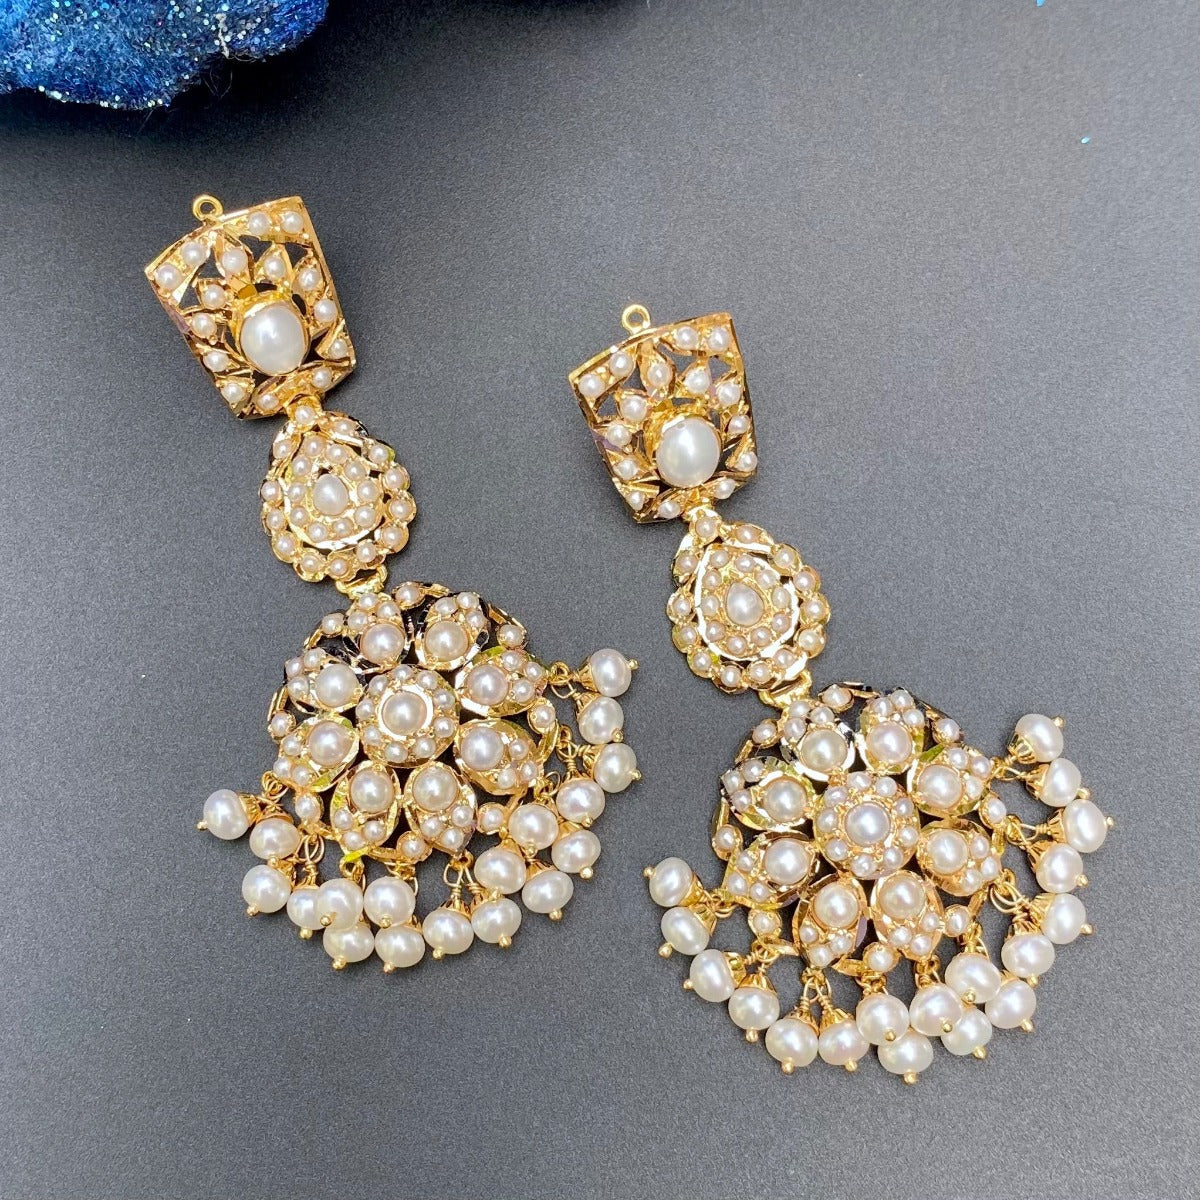 Beautiful Floral Pearl Earrings in 22ct Gold GER 061